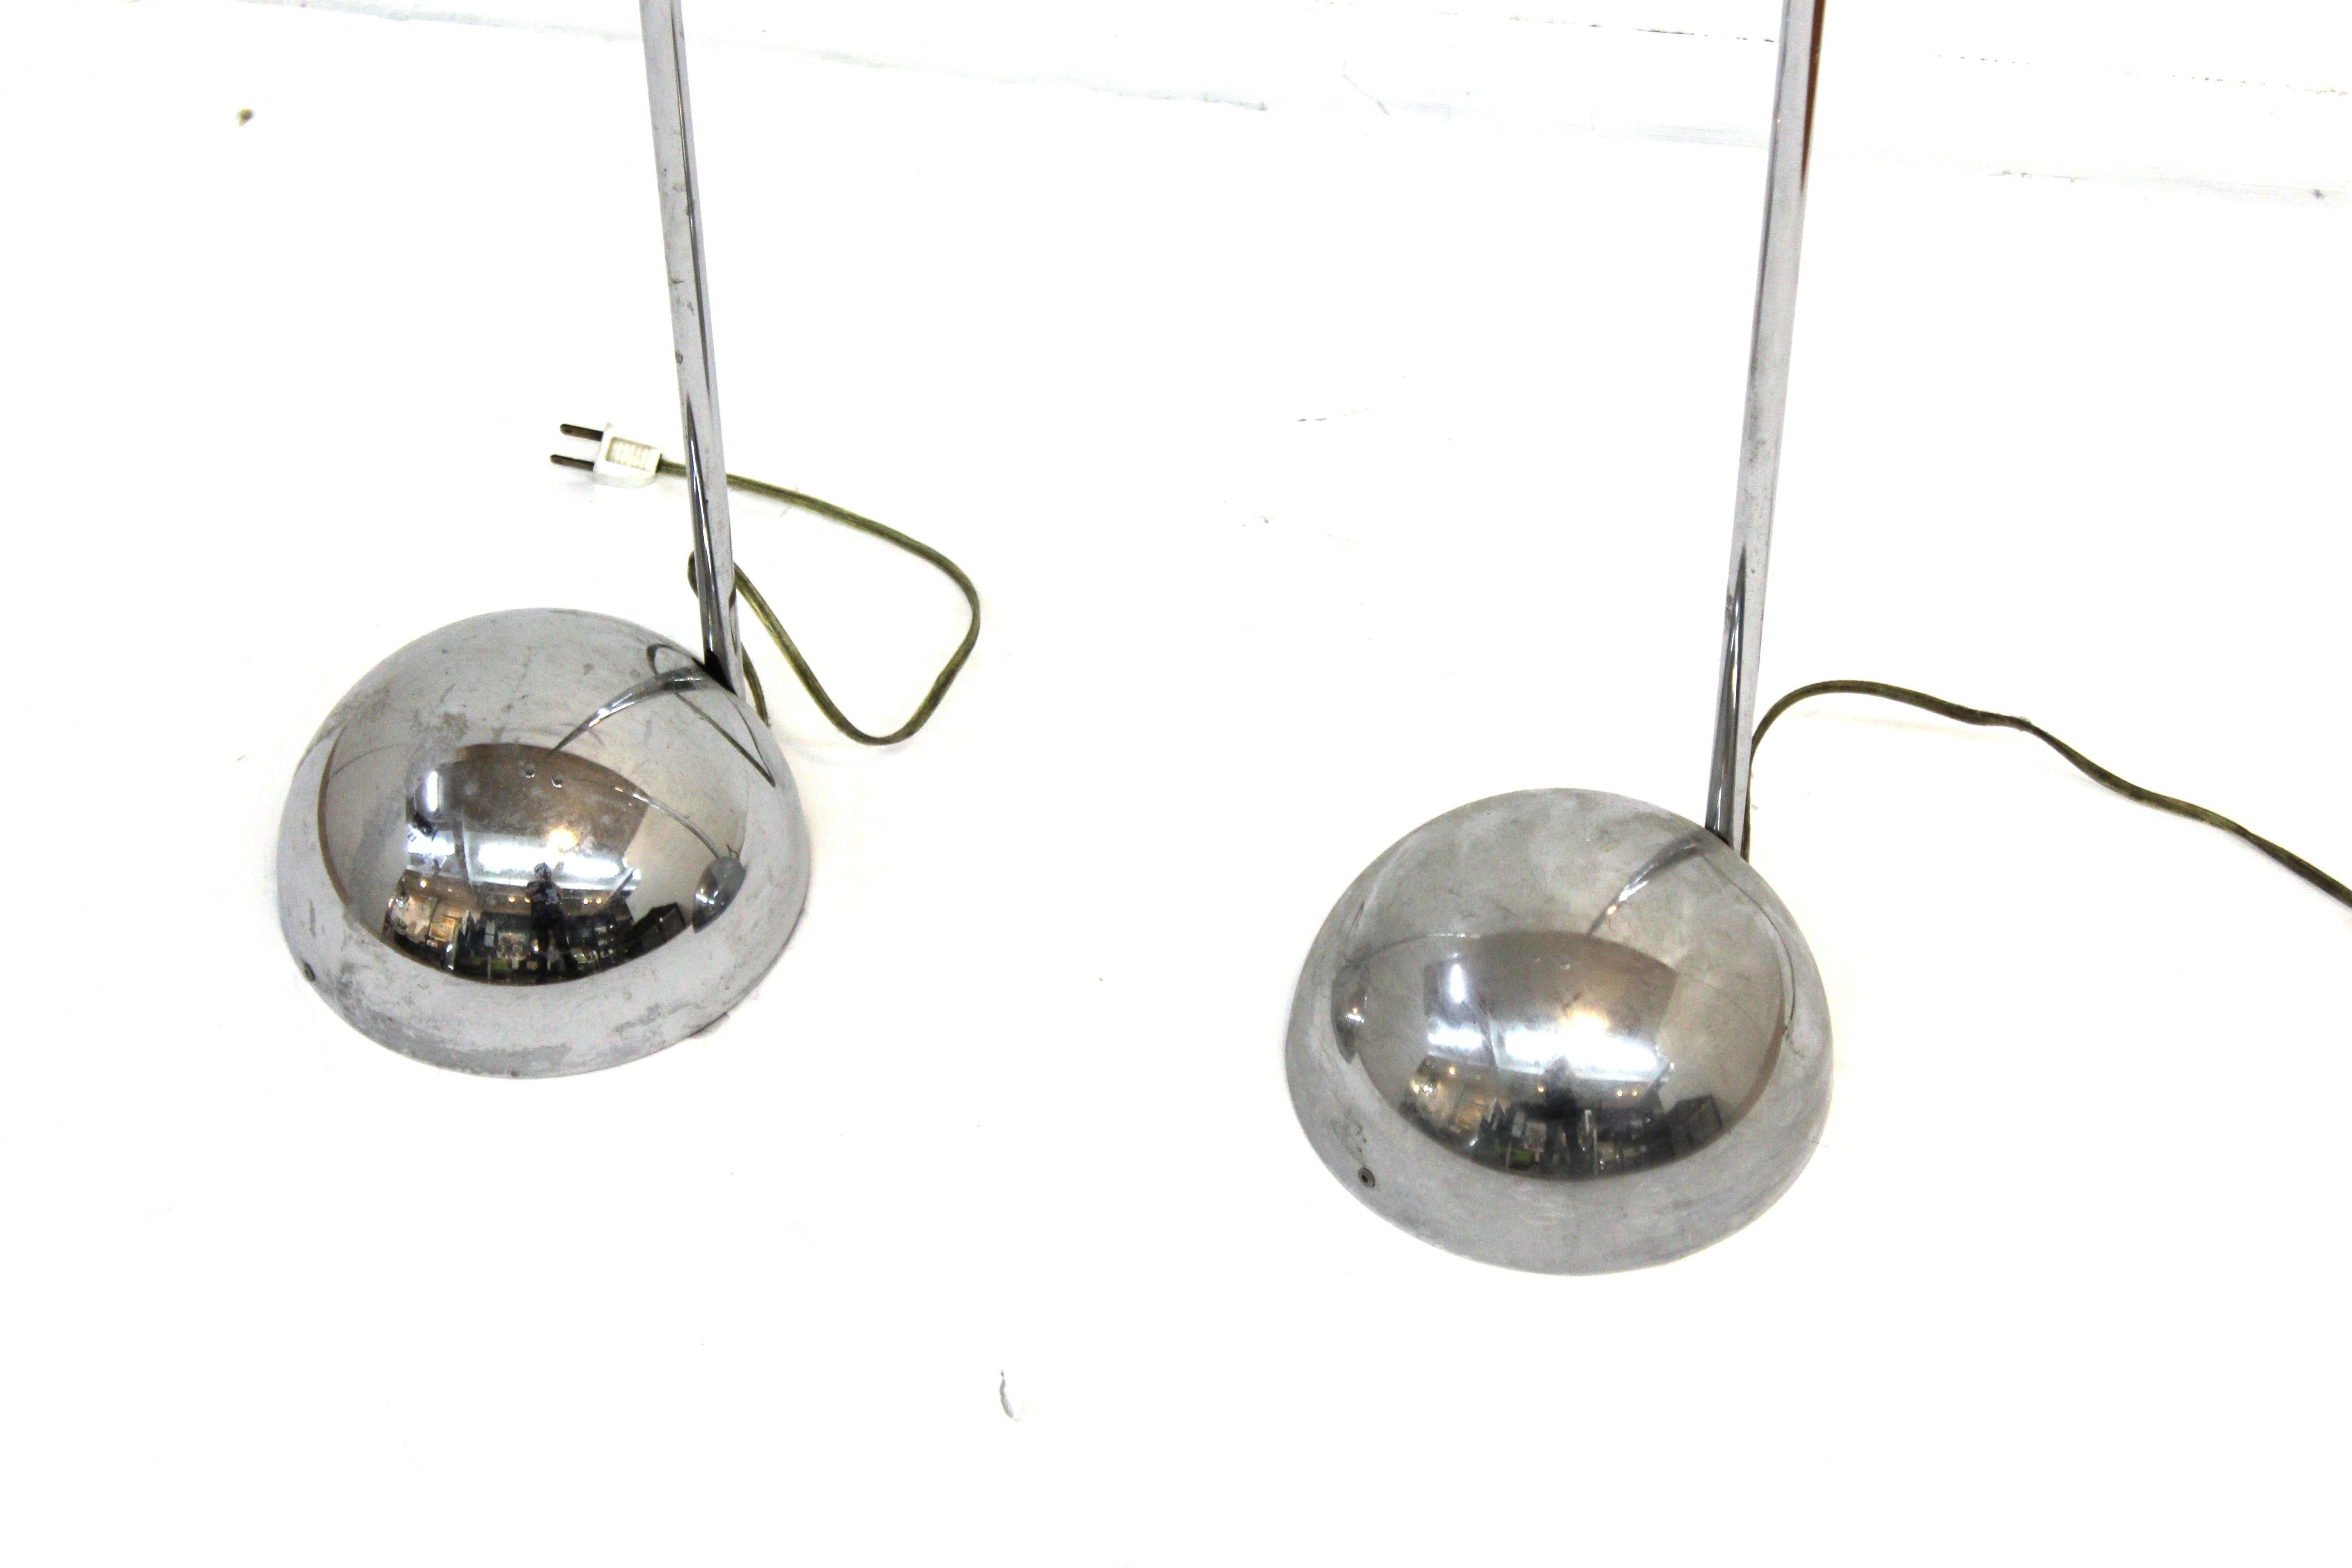 Italian Modern pair of torchiere floor lamps in chromed metal. The pair was likely made in Italy during the 1960s-1970s. IN great vintage condition with age-appropriate wear and use.